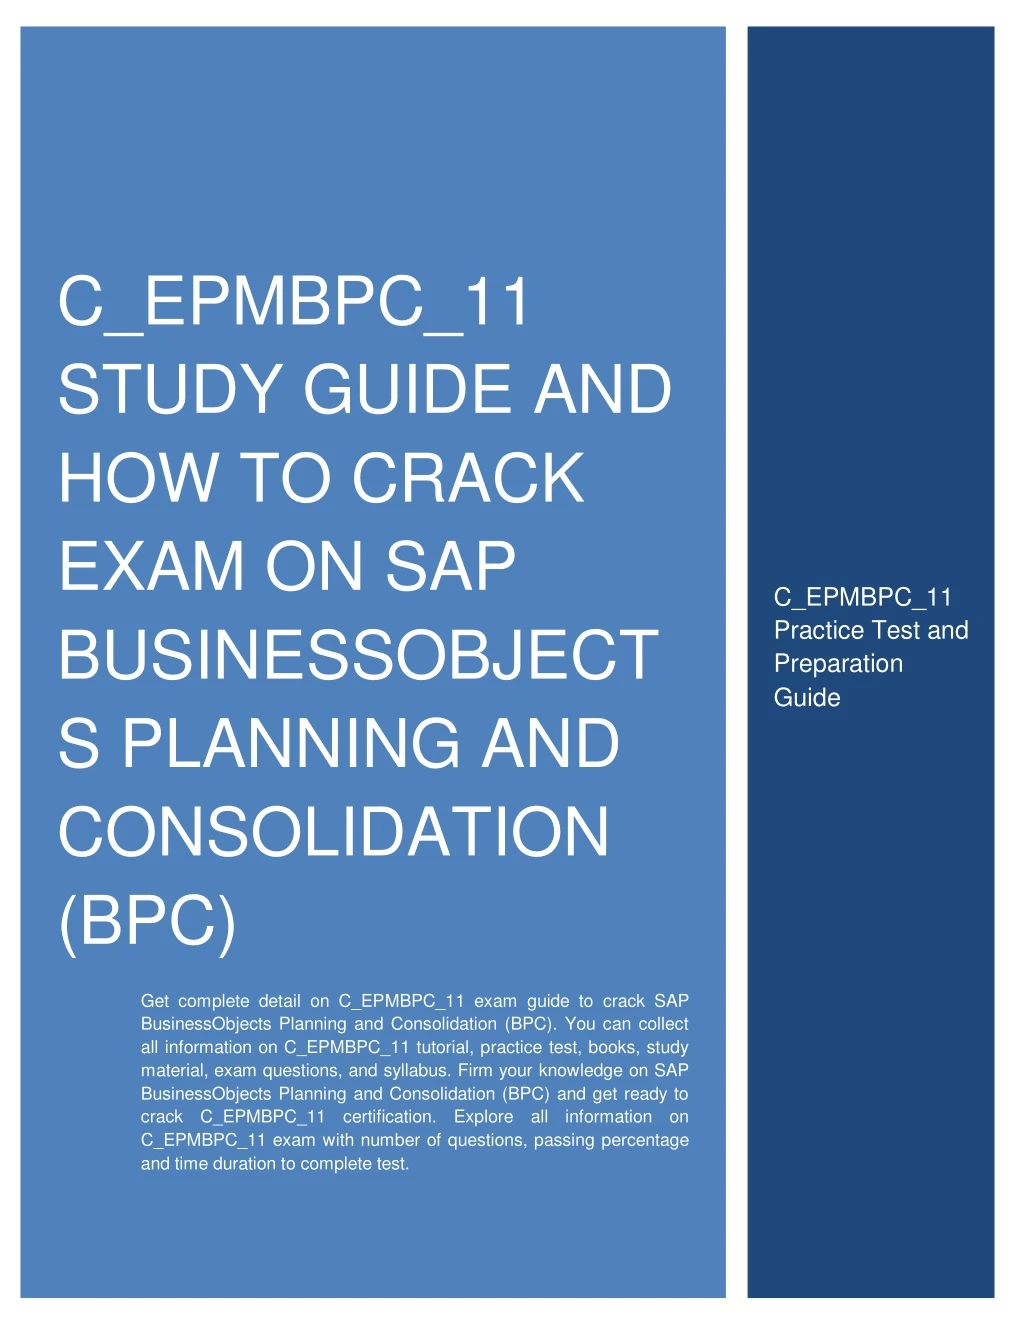 c epmbpc 11 study guide and how to crack exam